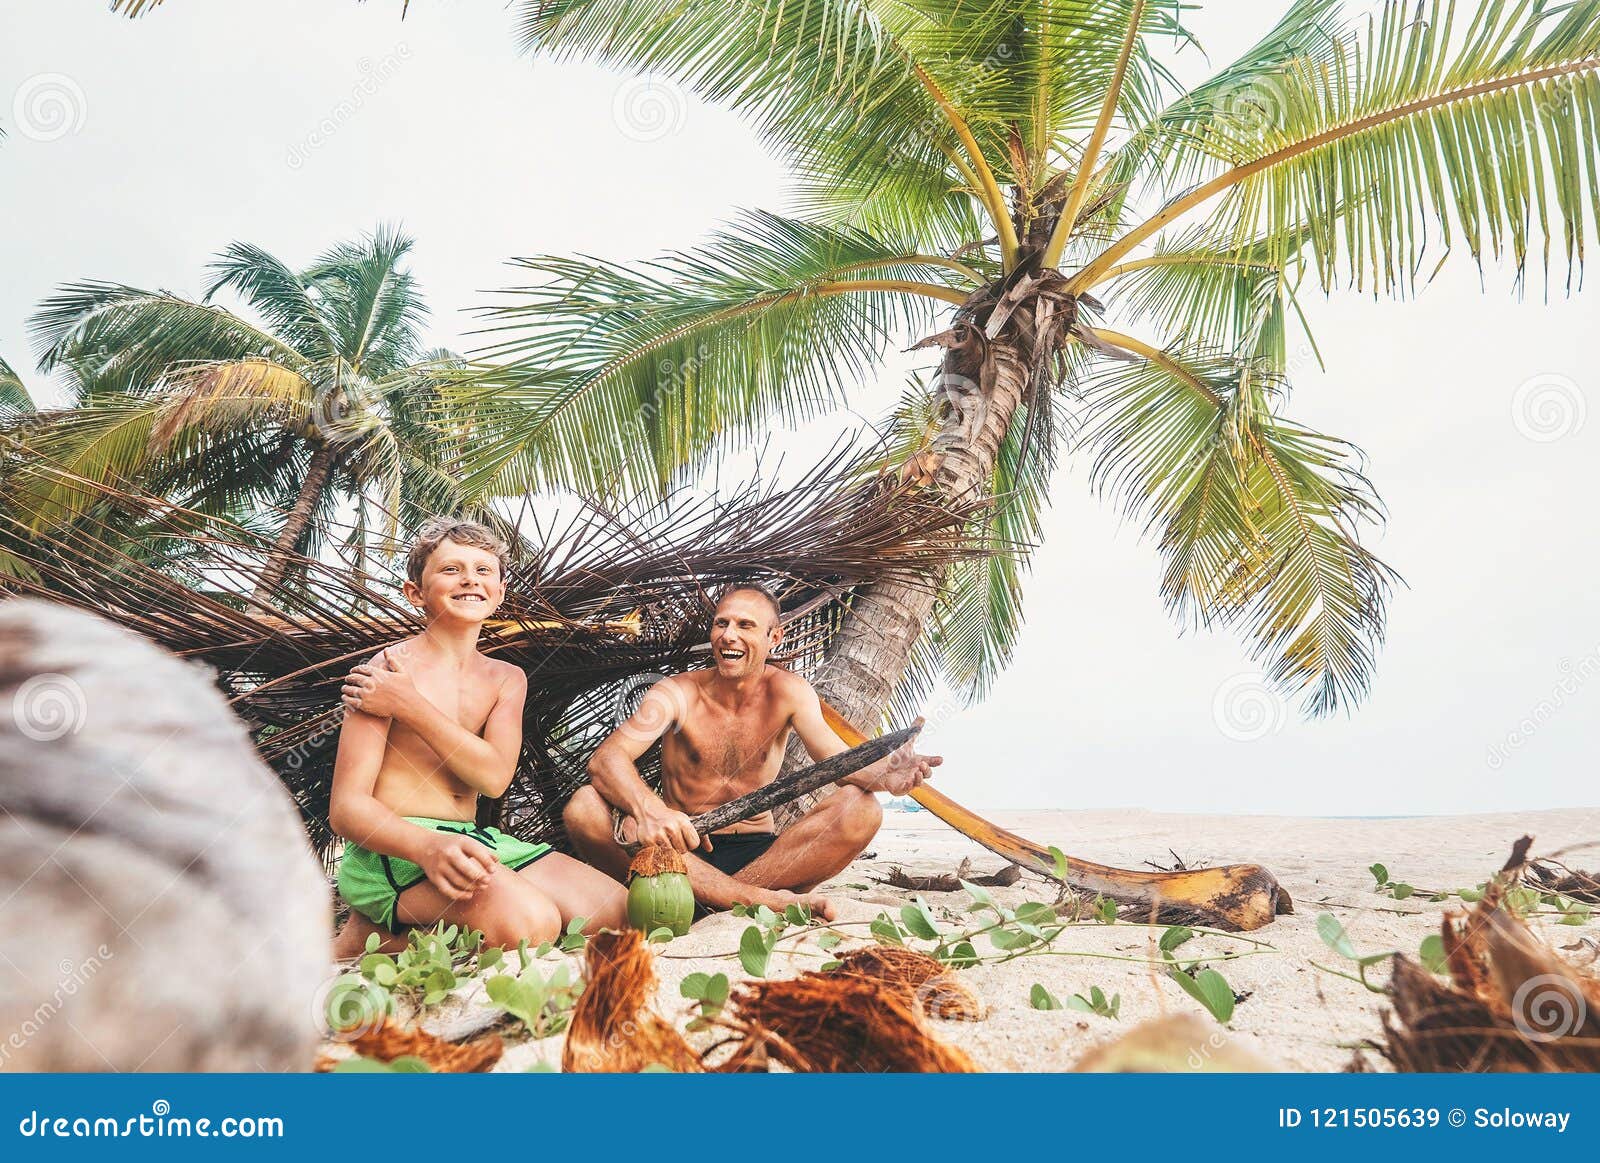 Gallery Nudism Vacation - Playing in Robinzones: Father and Son Built a Hut from Palm Tree Stock Image  - Image of children, hand: 121505639